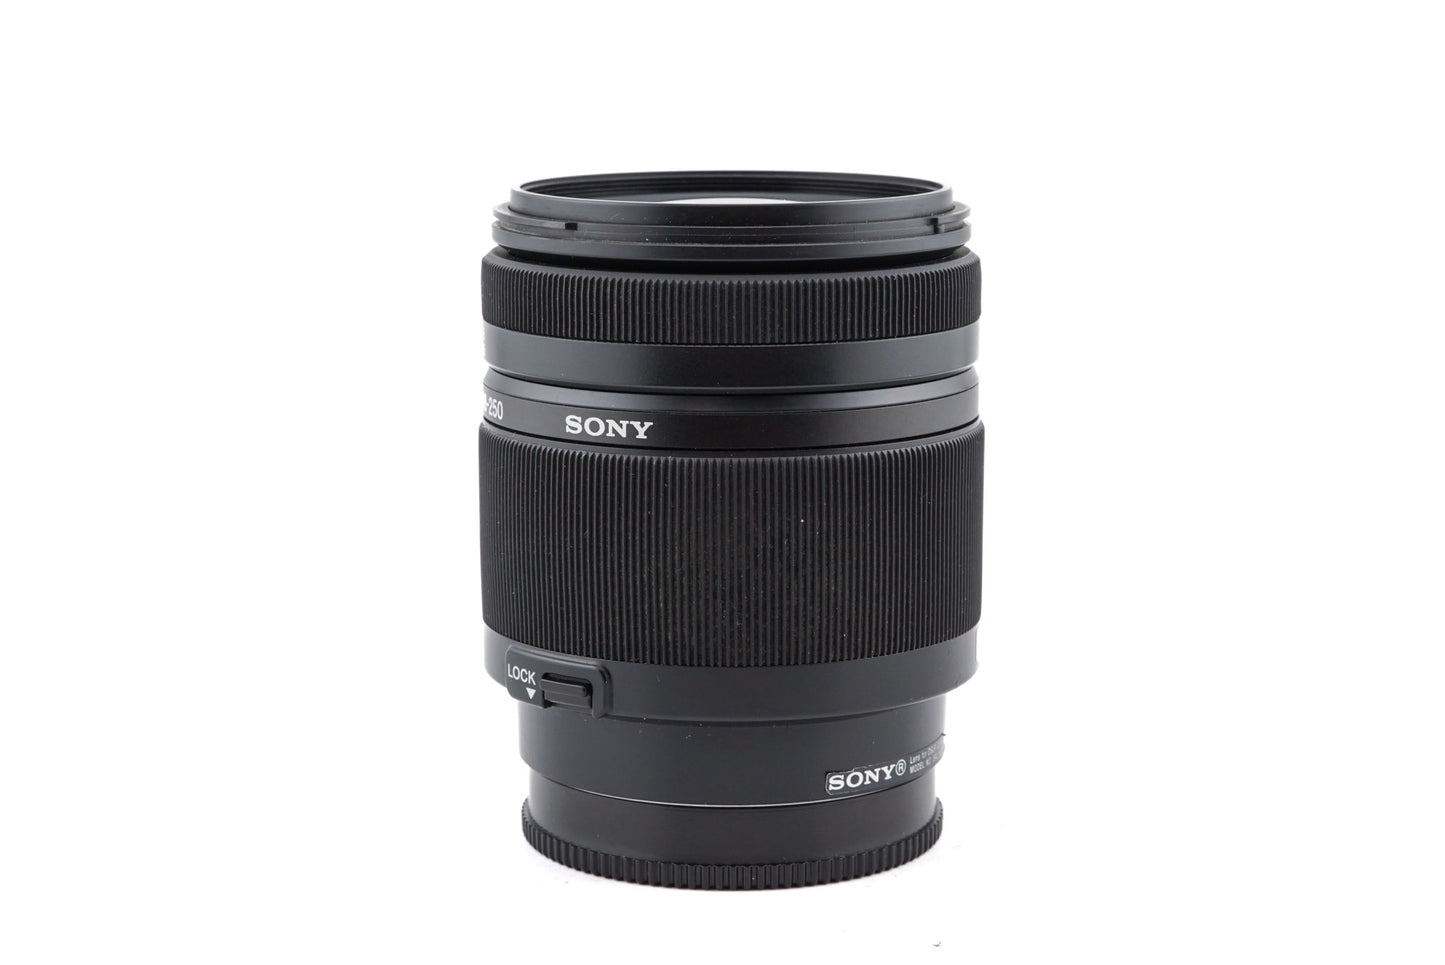 Sony 18-250mm f3.5-6.3 DT